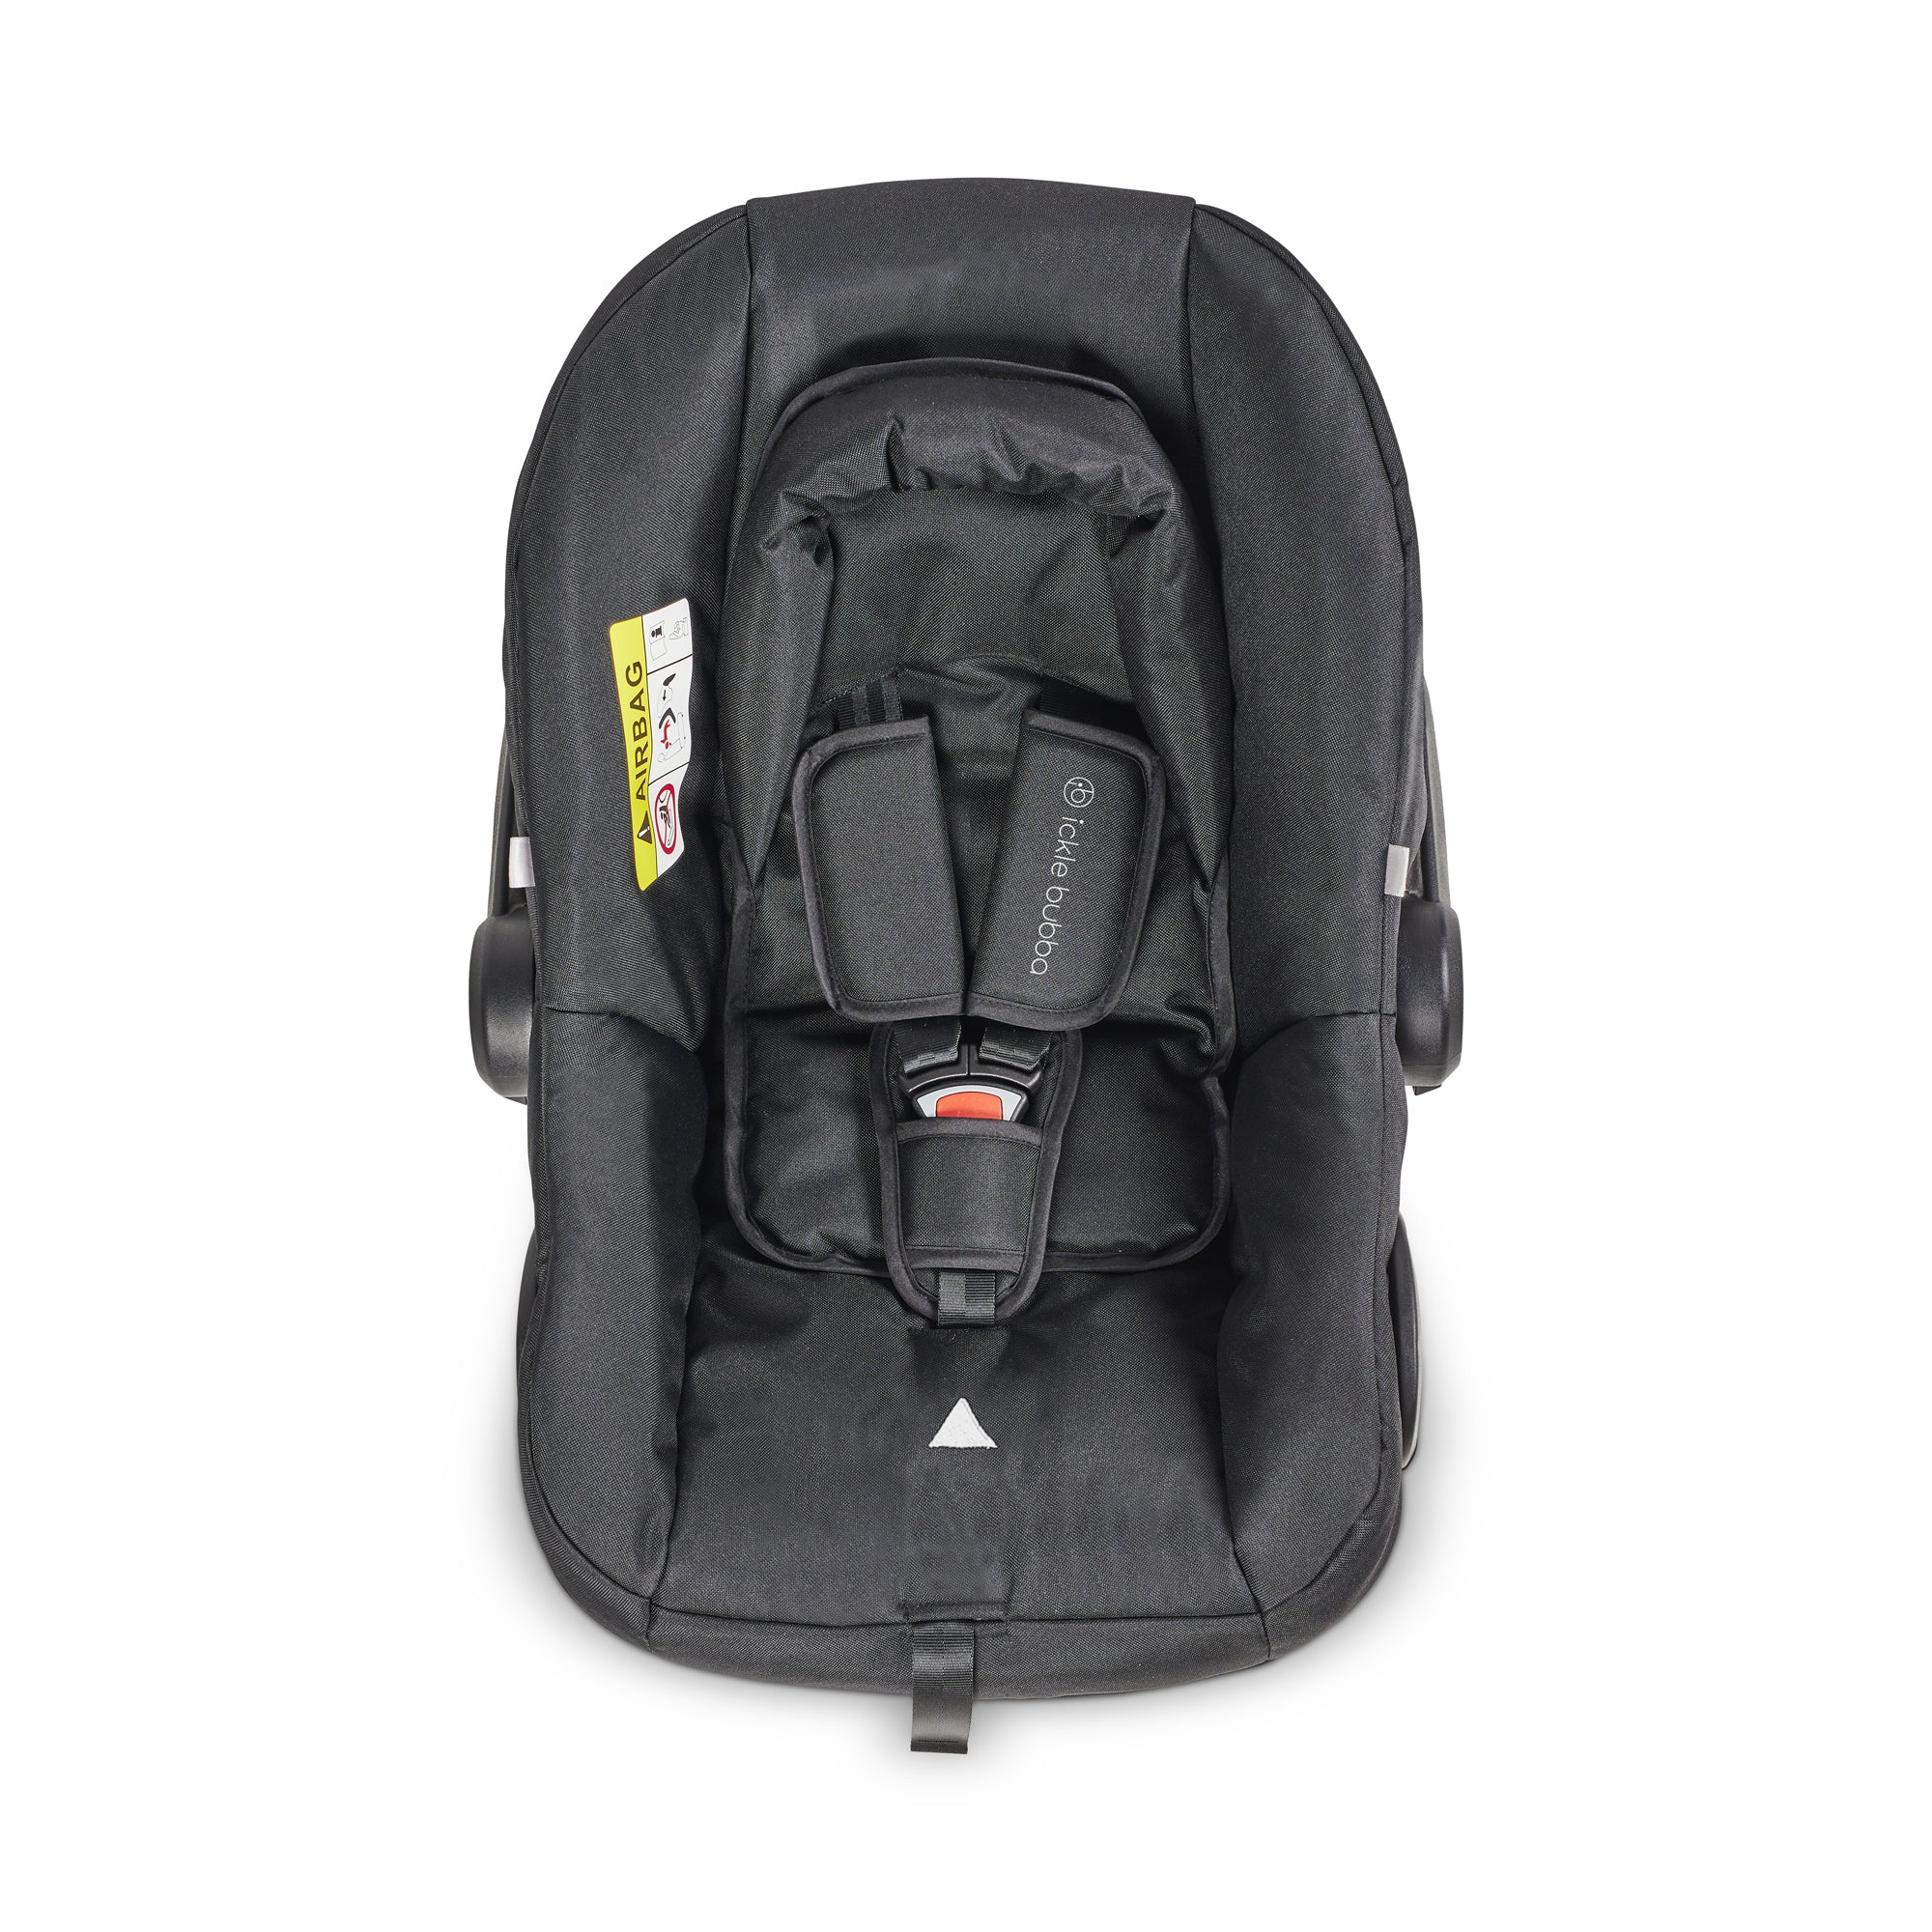 Astral Car Seat